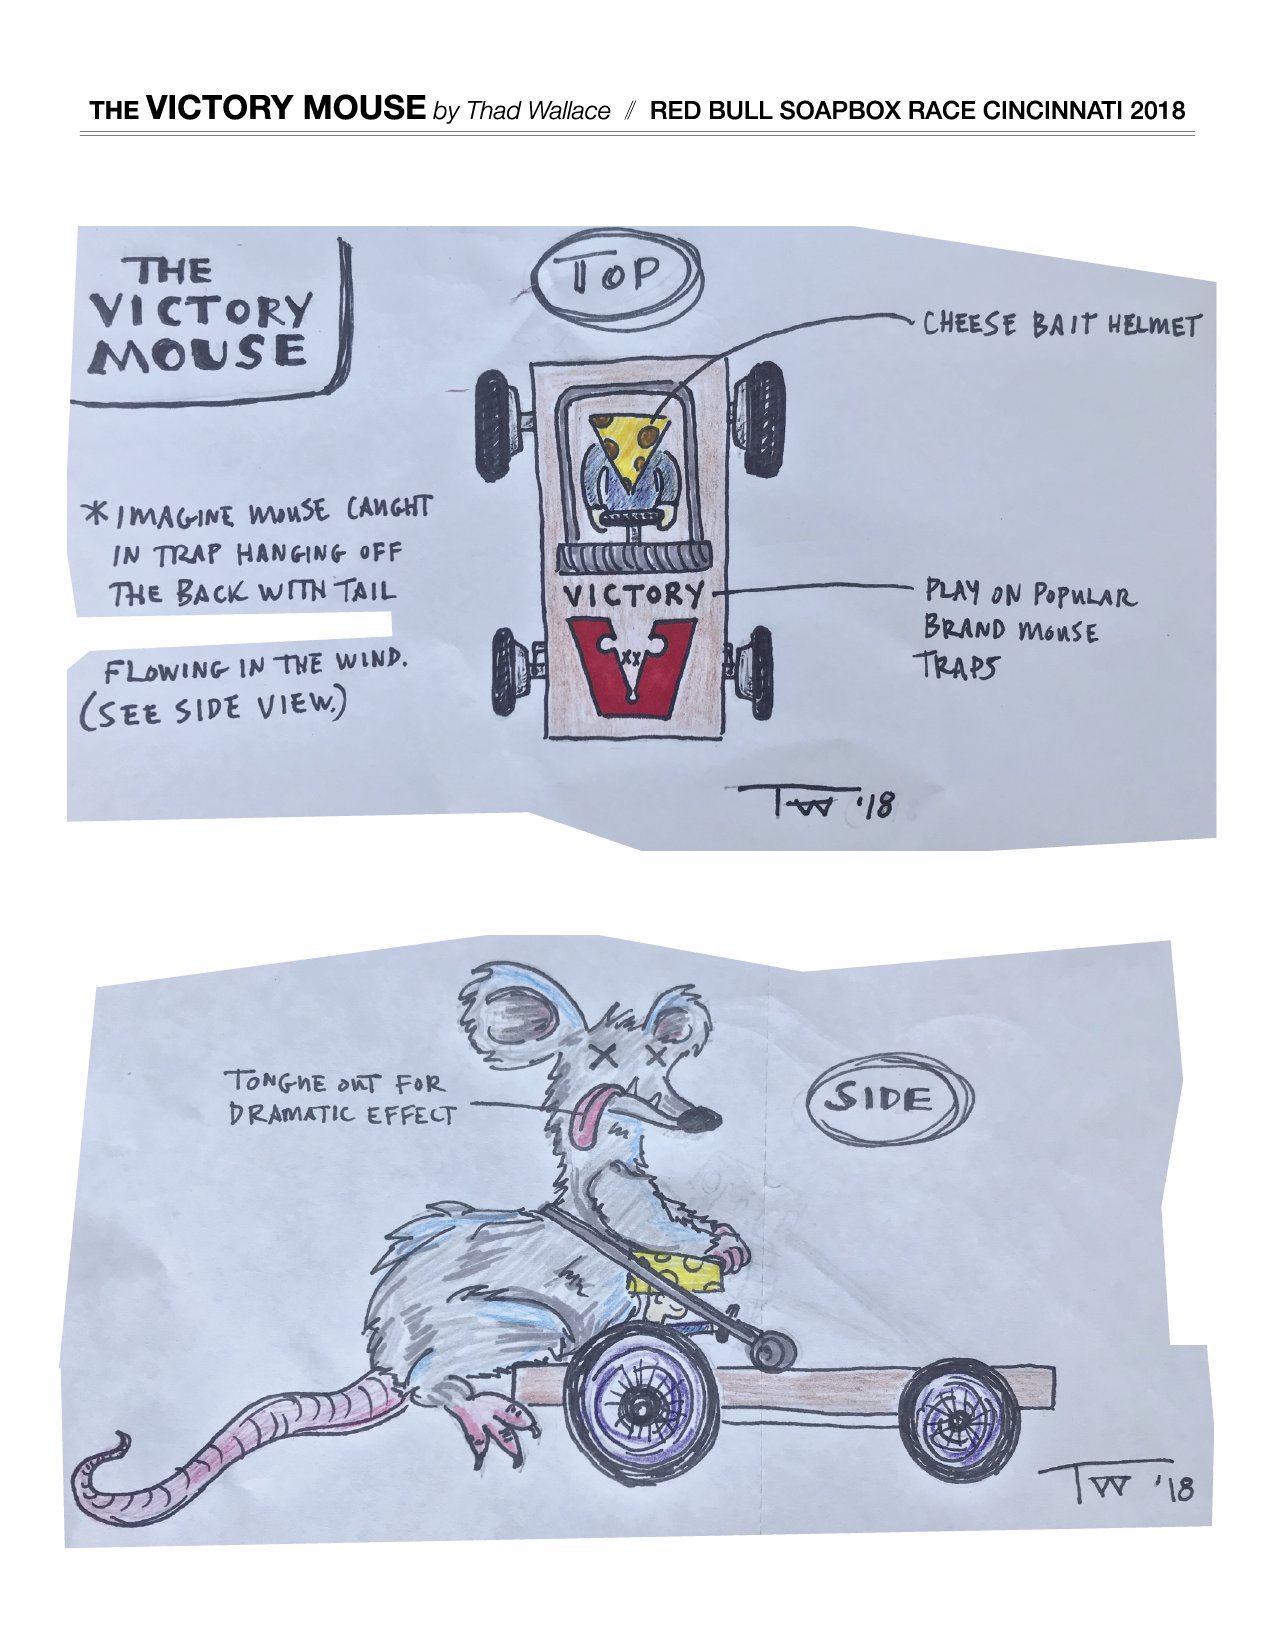 T. al Twitter: "Red Bull "The Victory Mouse" was a worthy for the #redbullsoapboxrace 2018 in Cincy. It's on a classic Industrial Tech and Design/Build mousetrap car. Now